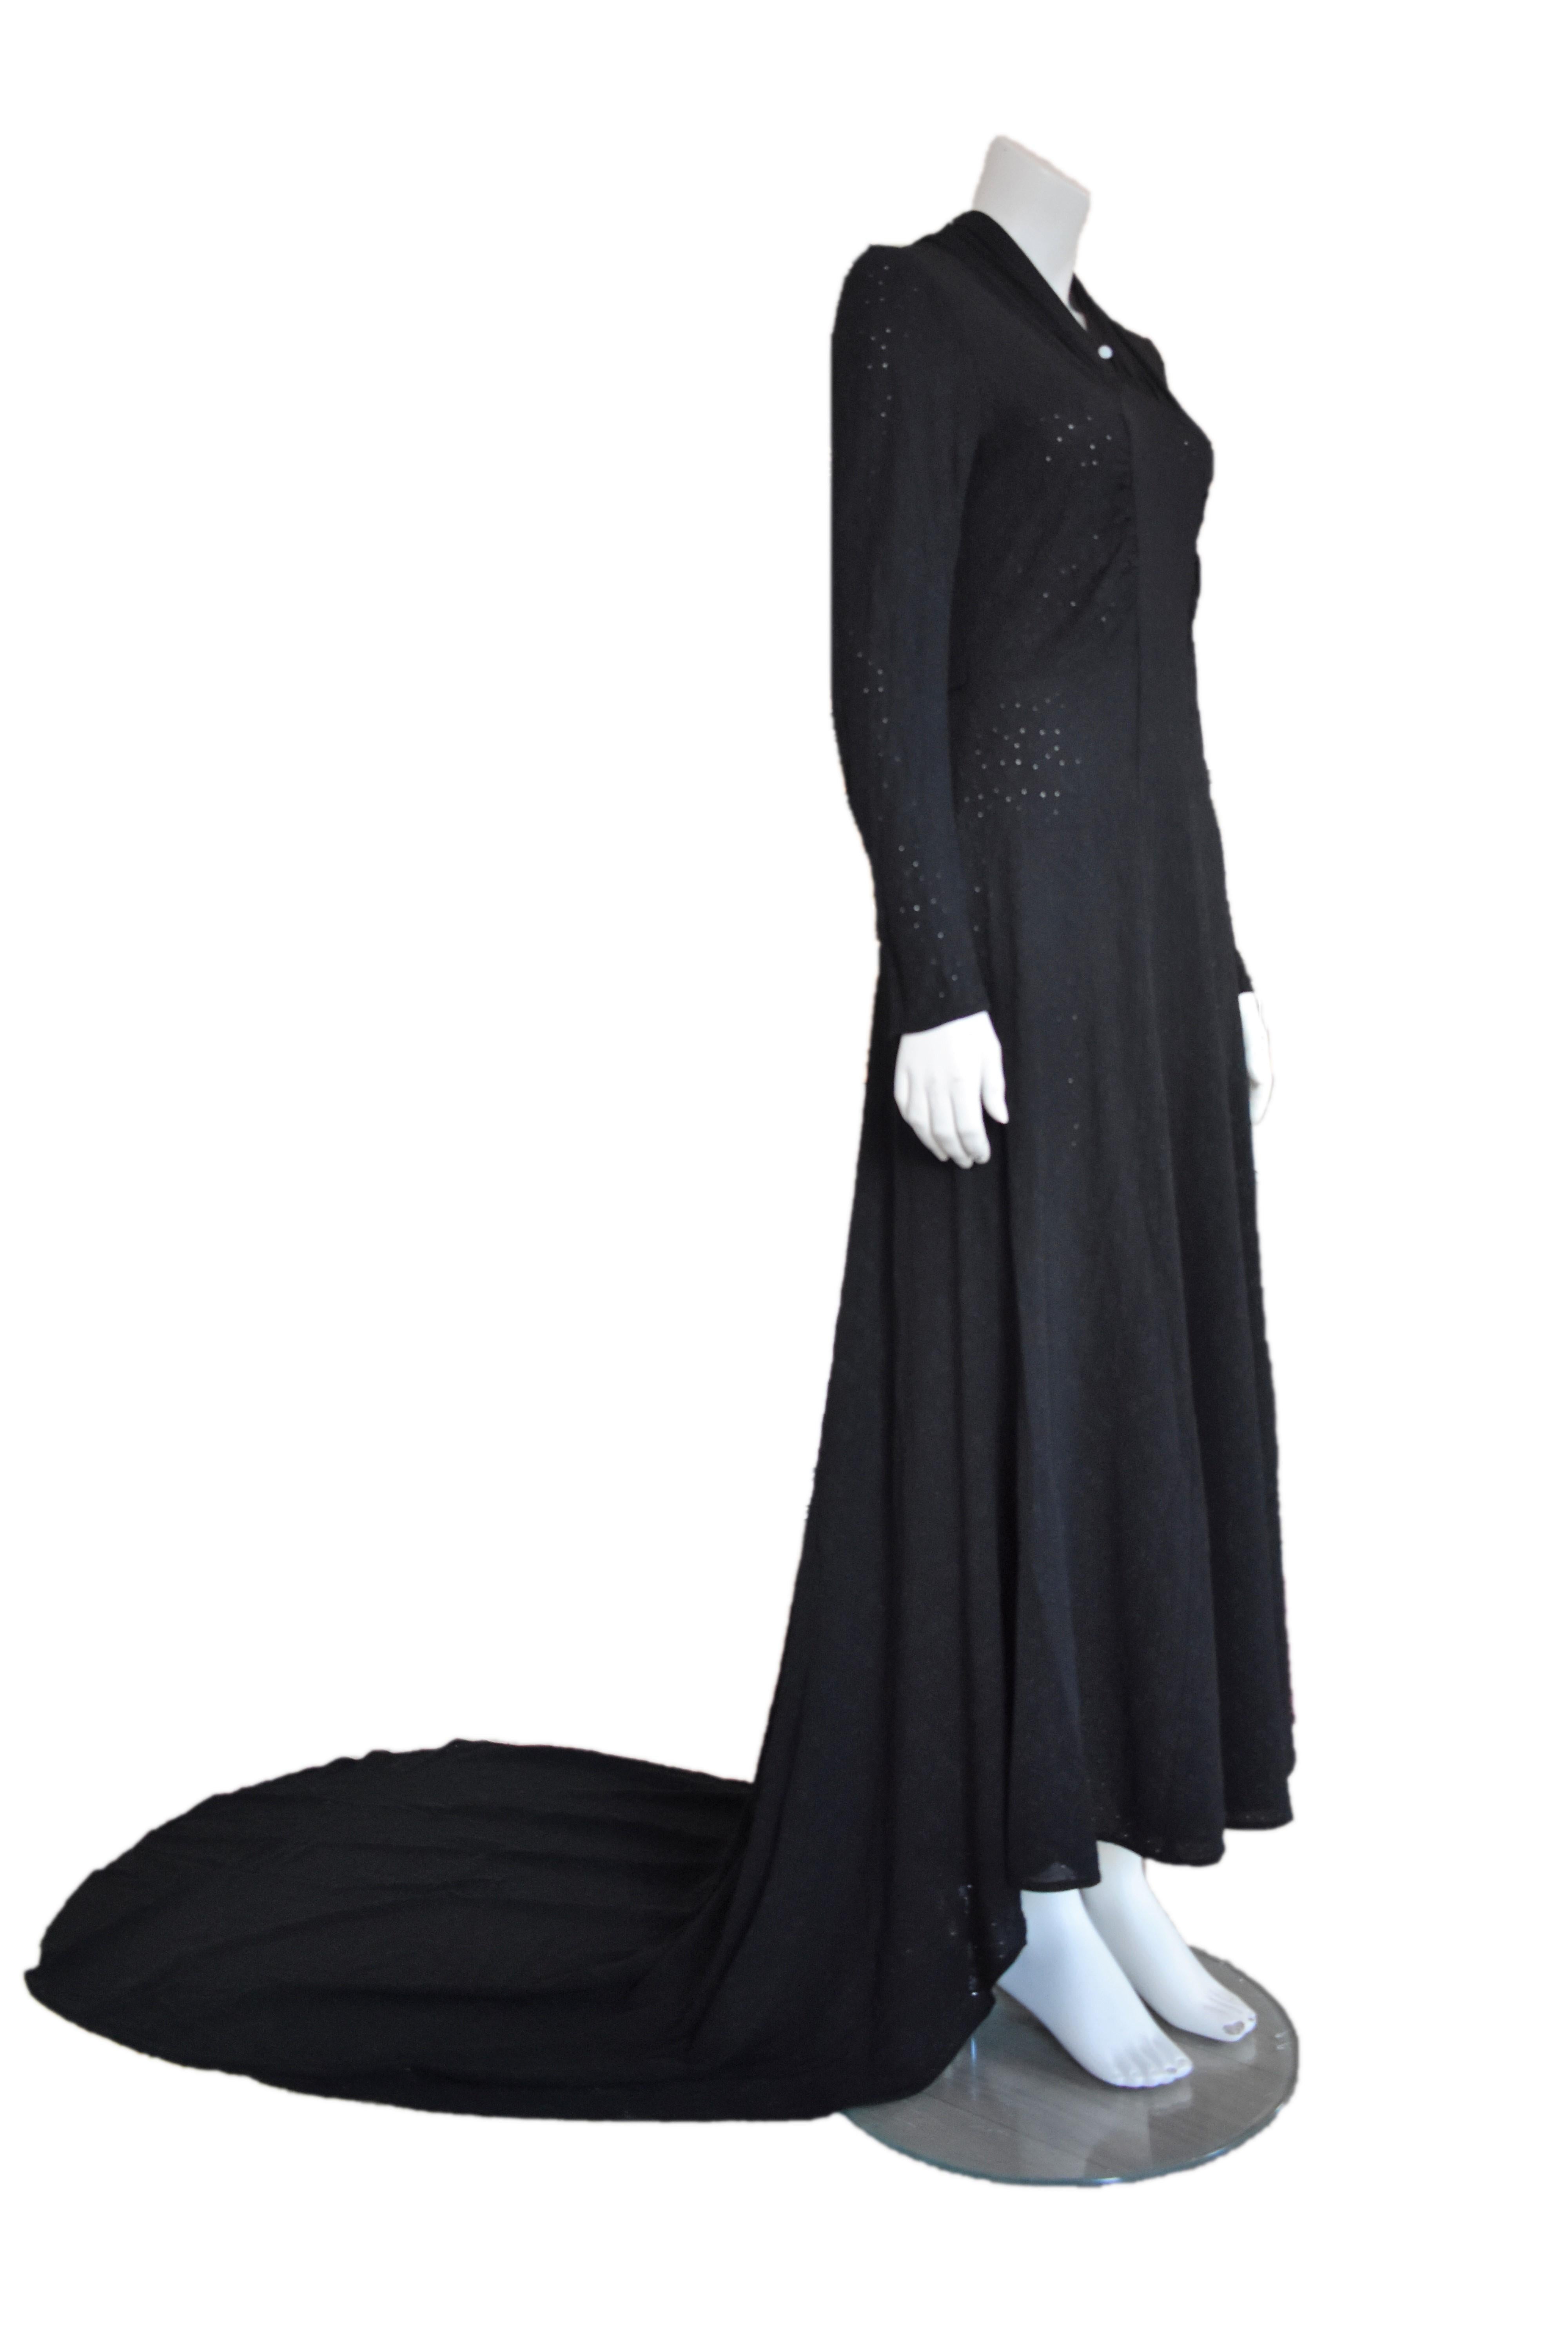 FINAL SALE Vintage Embroidered Hand-Made 1940's Black Gown with Long Train (Schwarz) im Angebot